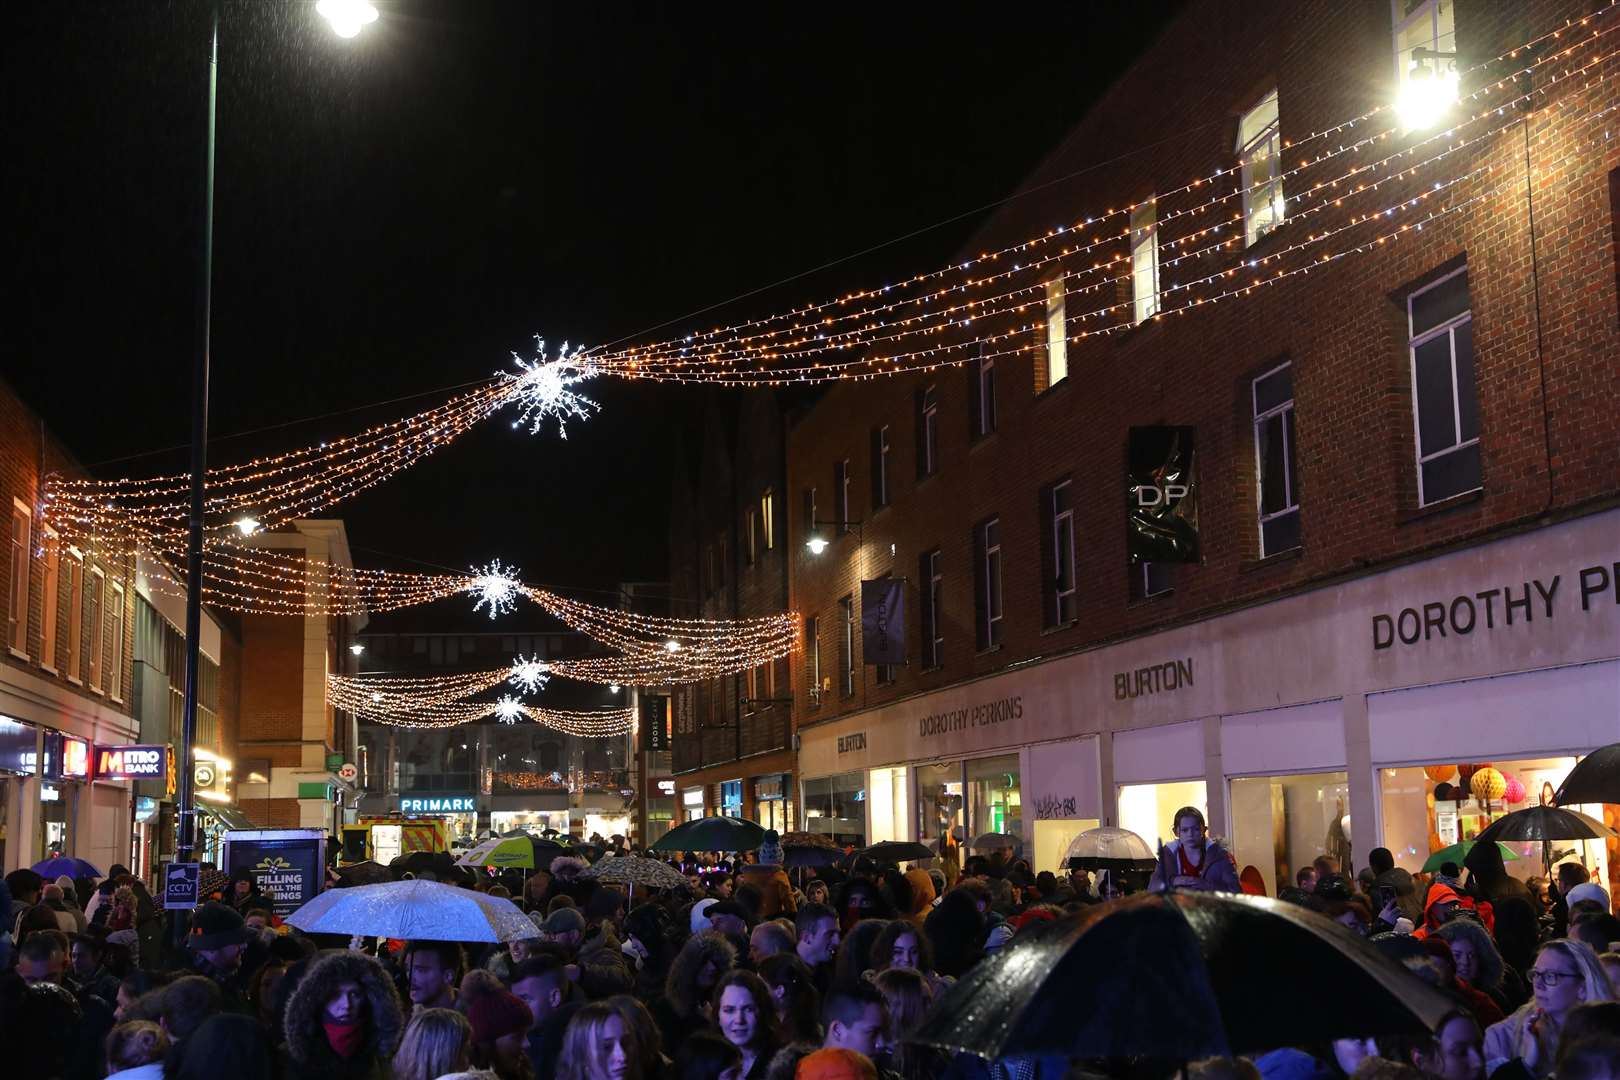 The Christmas lights switch-on is one of the big attractions